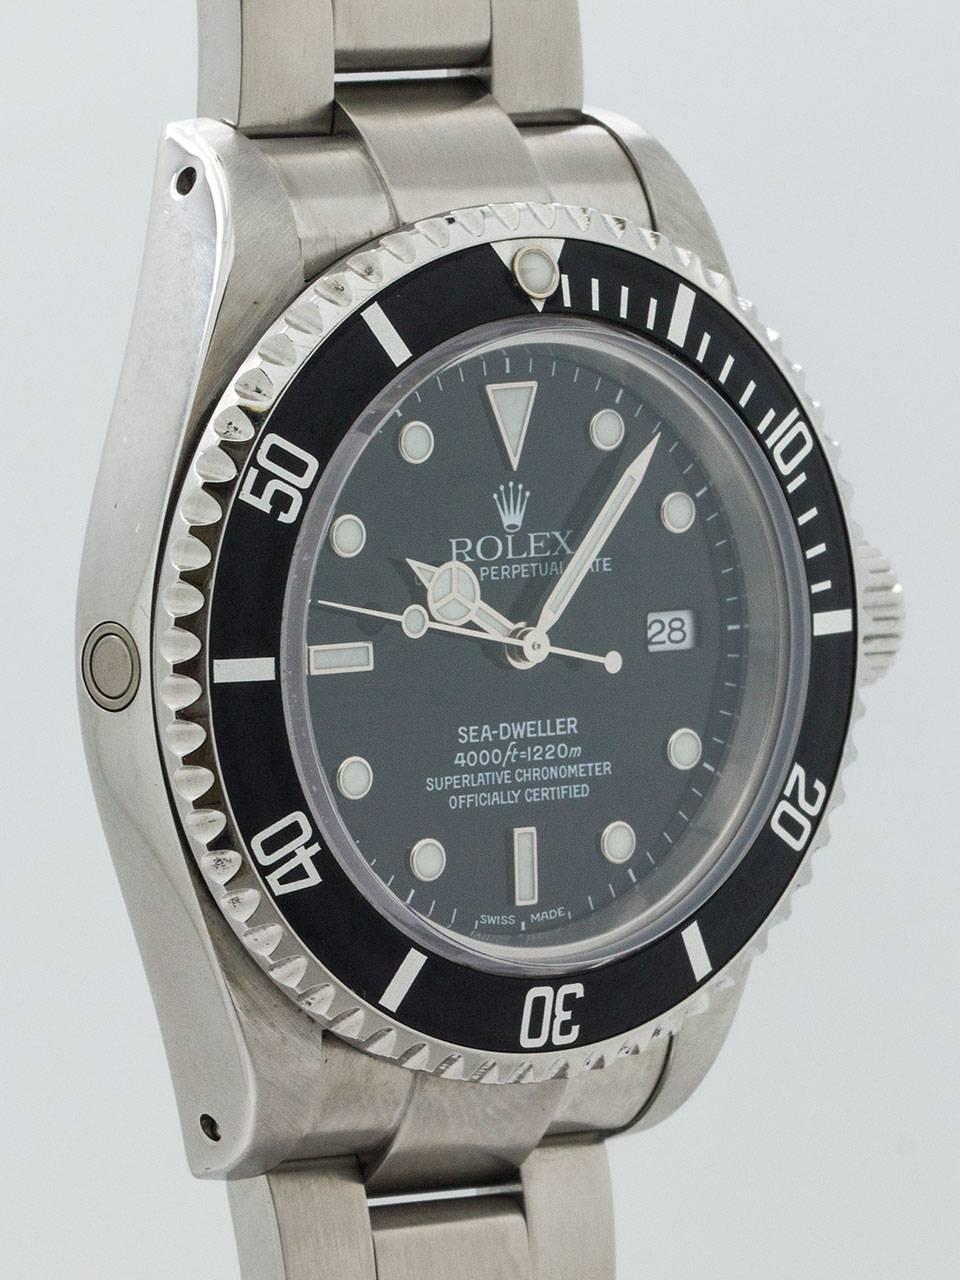 Rolex Stainless Steel Sea-Dweller ref 16600 serial# Y6 circa 2002. Full set complete with box and papers and all original accessories. Featuring 40mm diameter case with unidirectional elapsed time bezel and sapphire crystal. Original glossy black